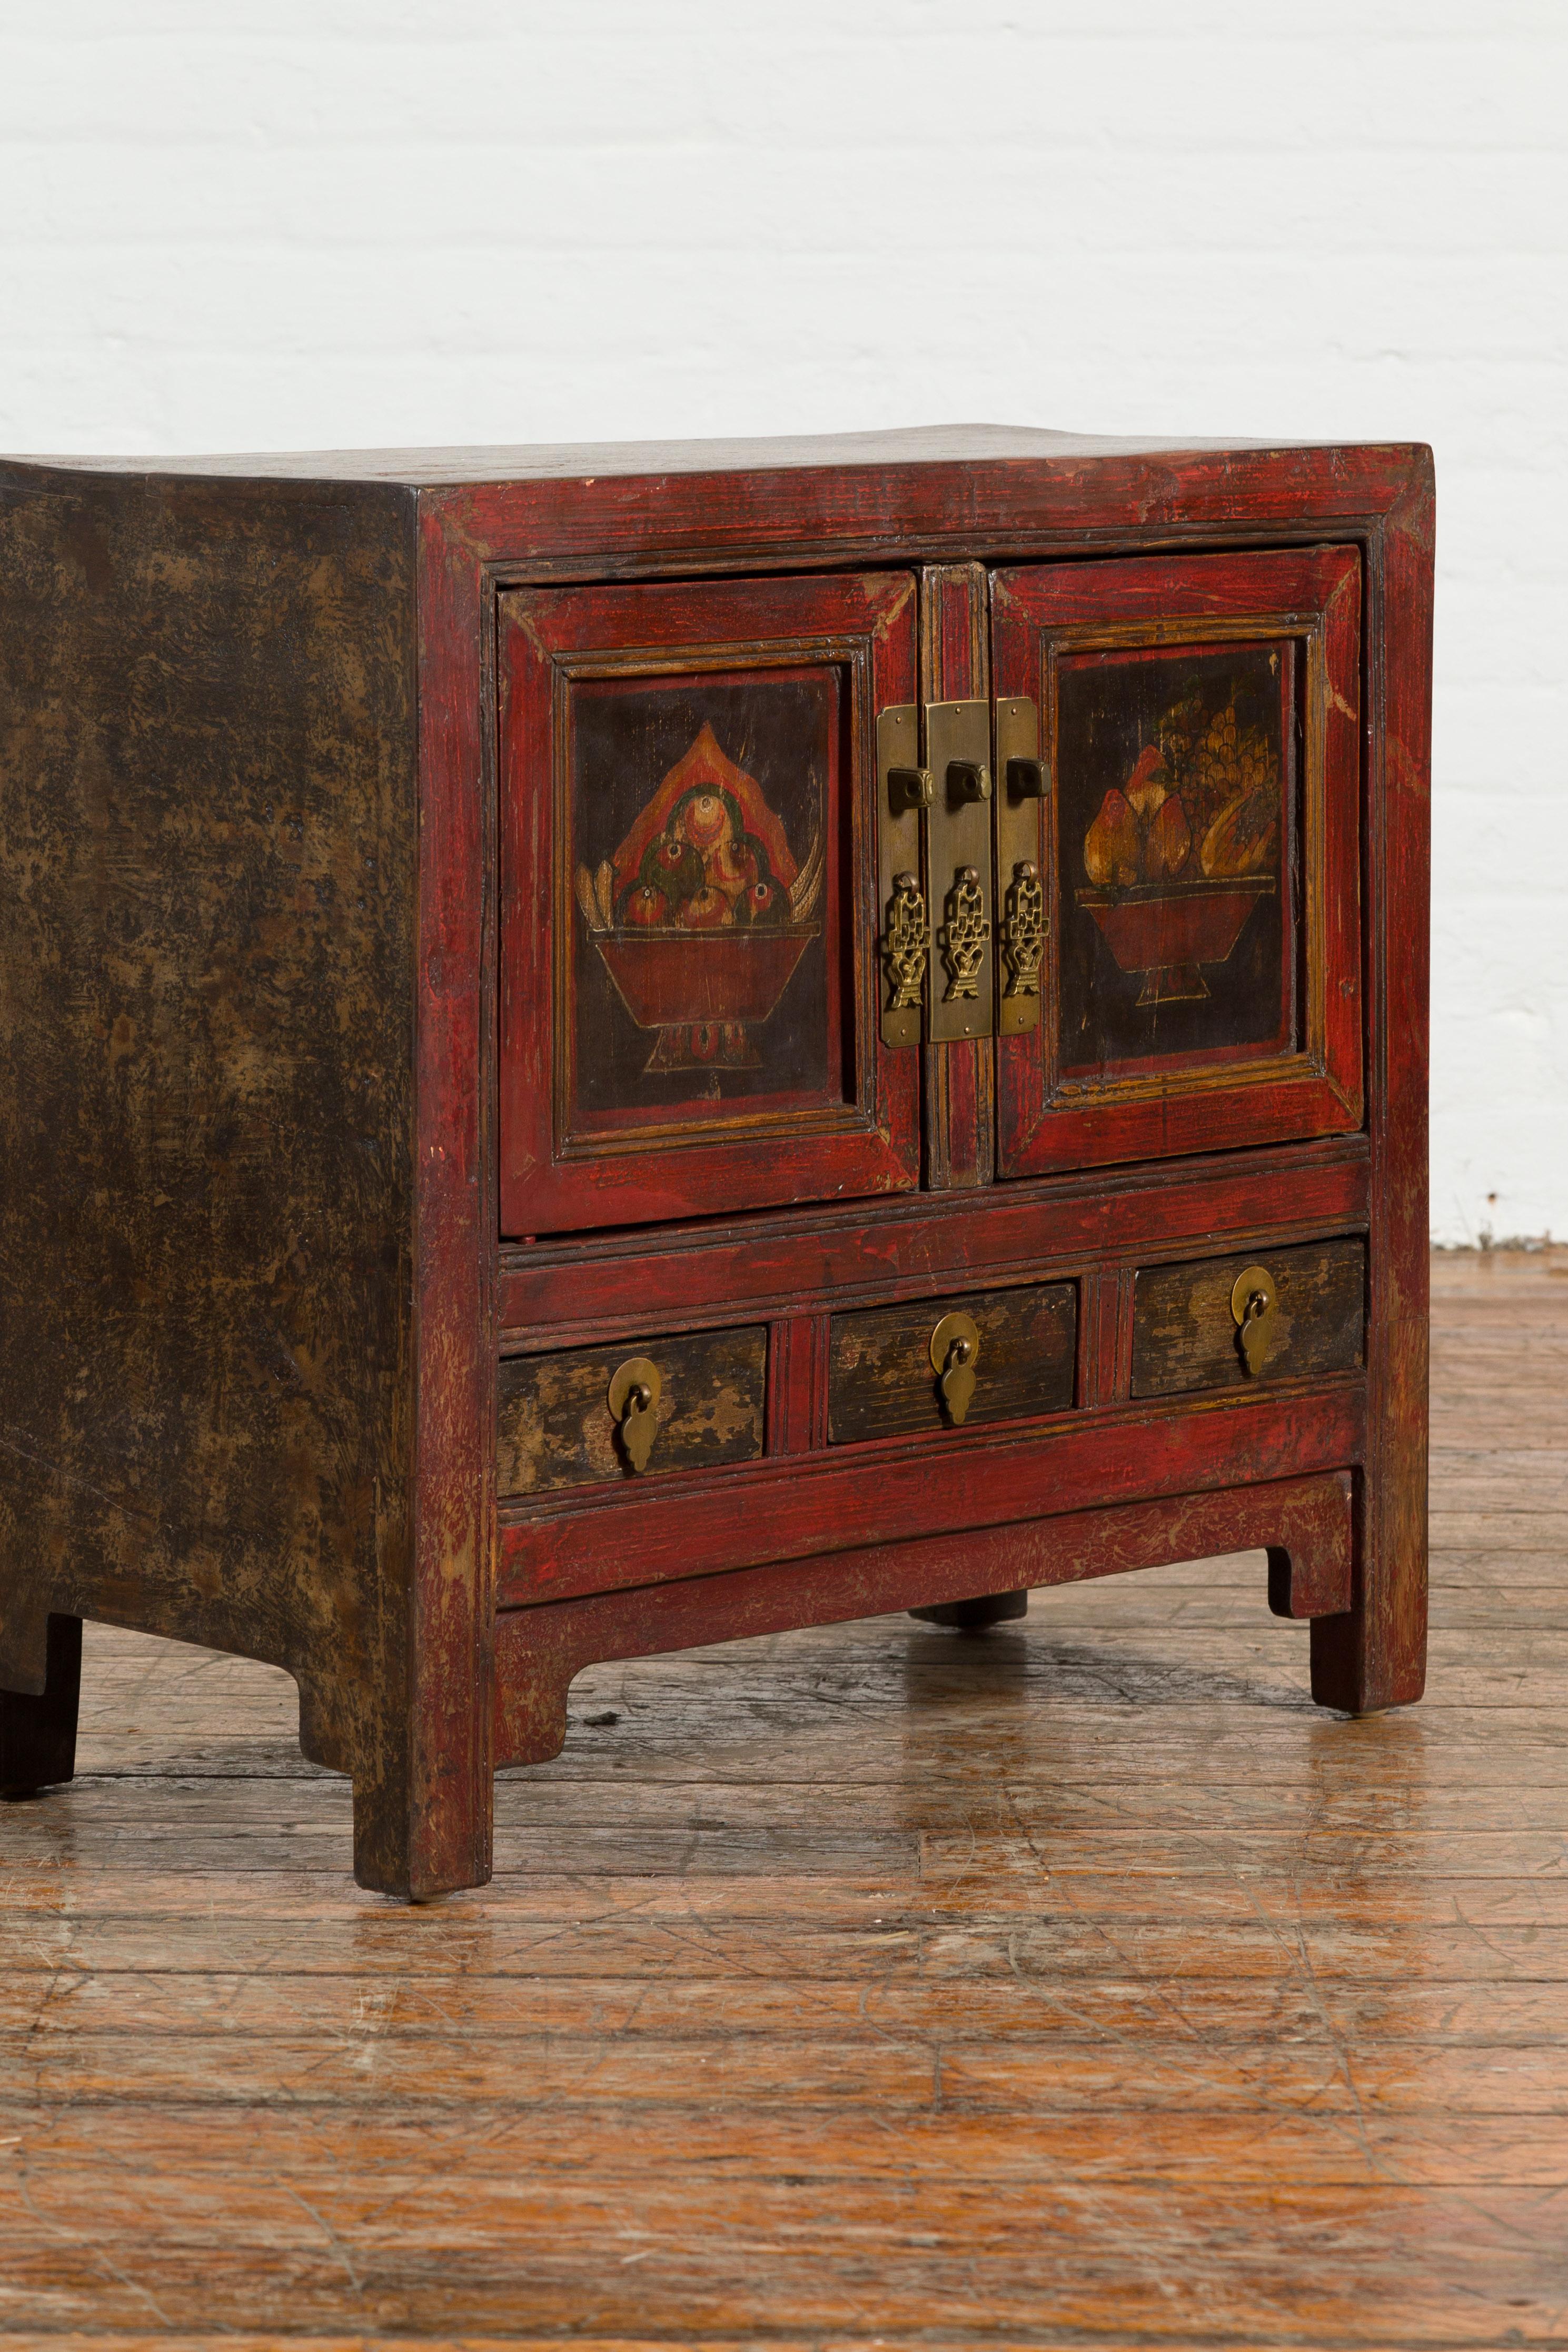 Chinese Qing Dynasty 19th Century Red Lacquer Cabinet with Painted Fruit Baskets For Sale 3